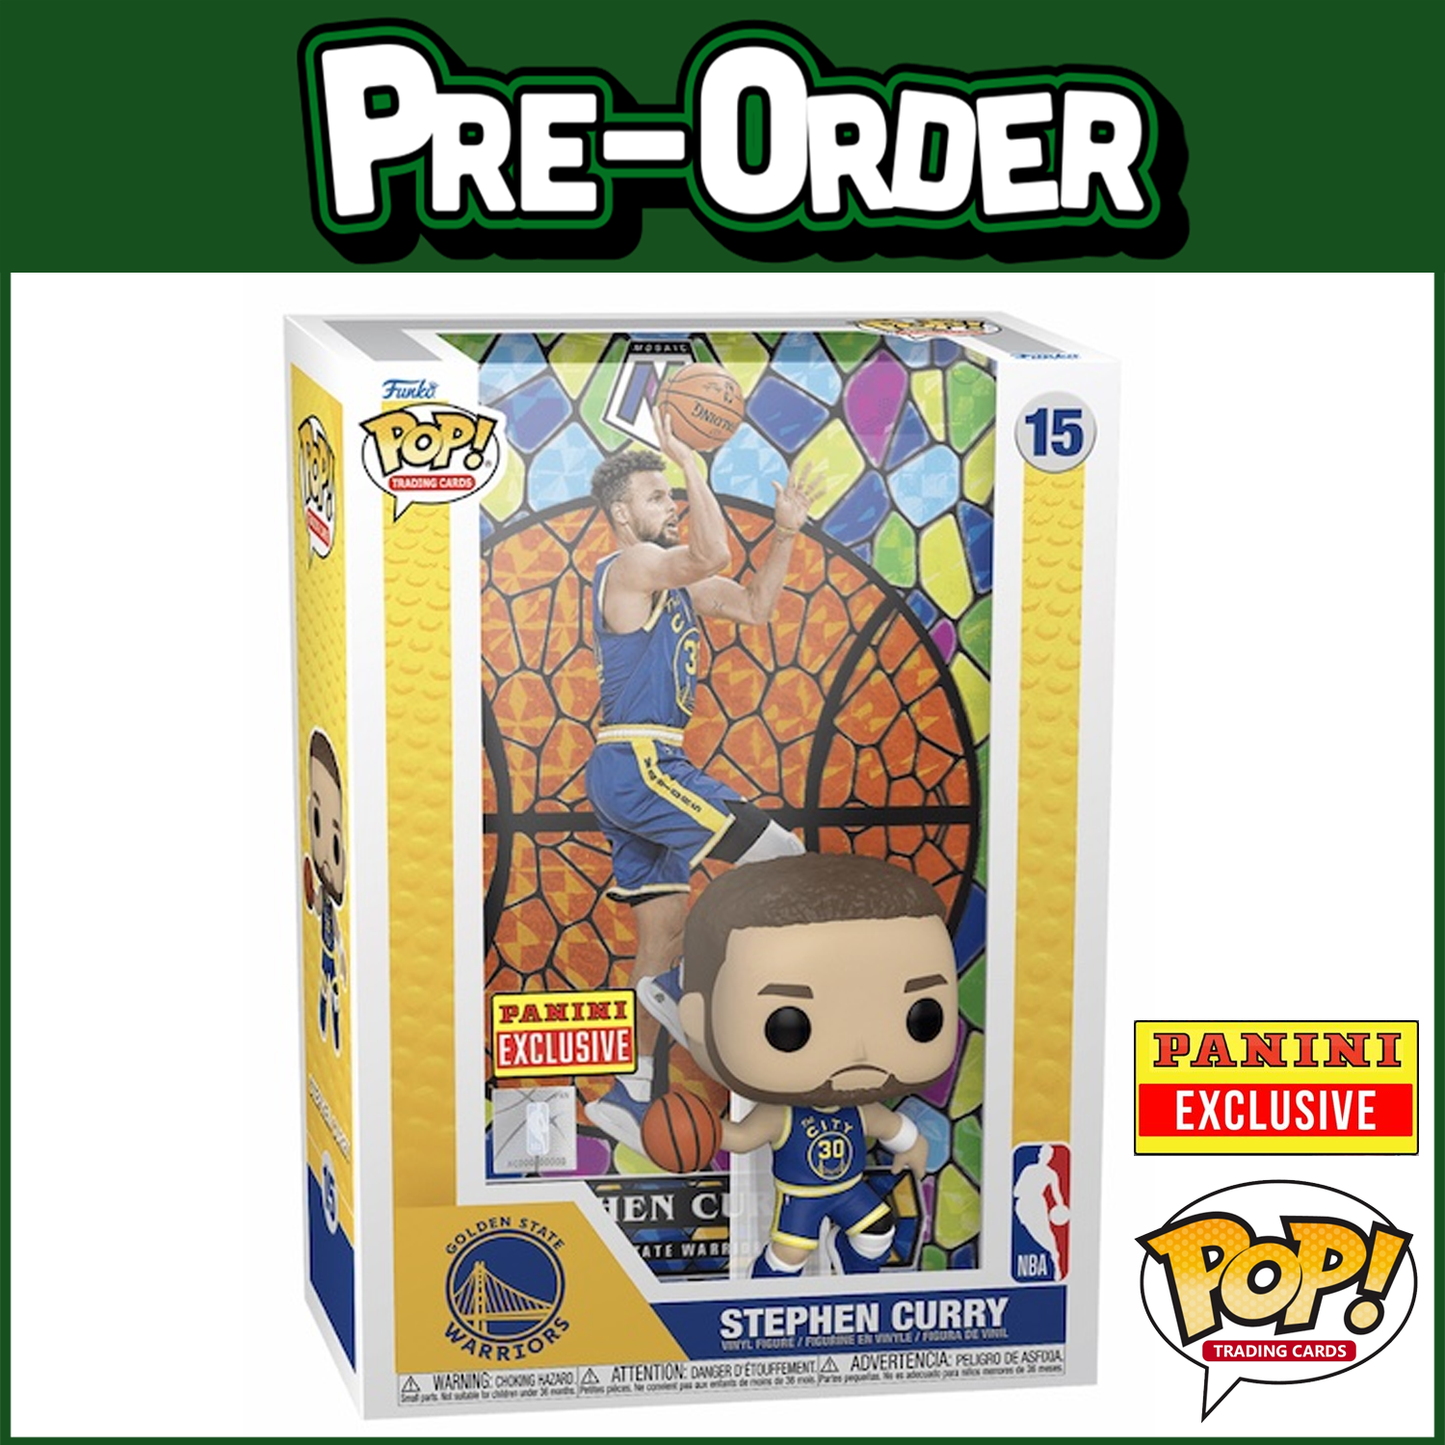 (PRE-ORDER) Funko POP! Trading Cards: Stephen Curry - Mosaic Prism #15 (Panini Exclusive)